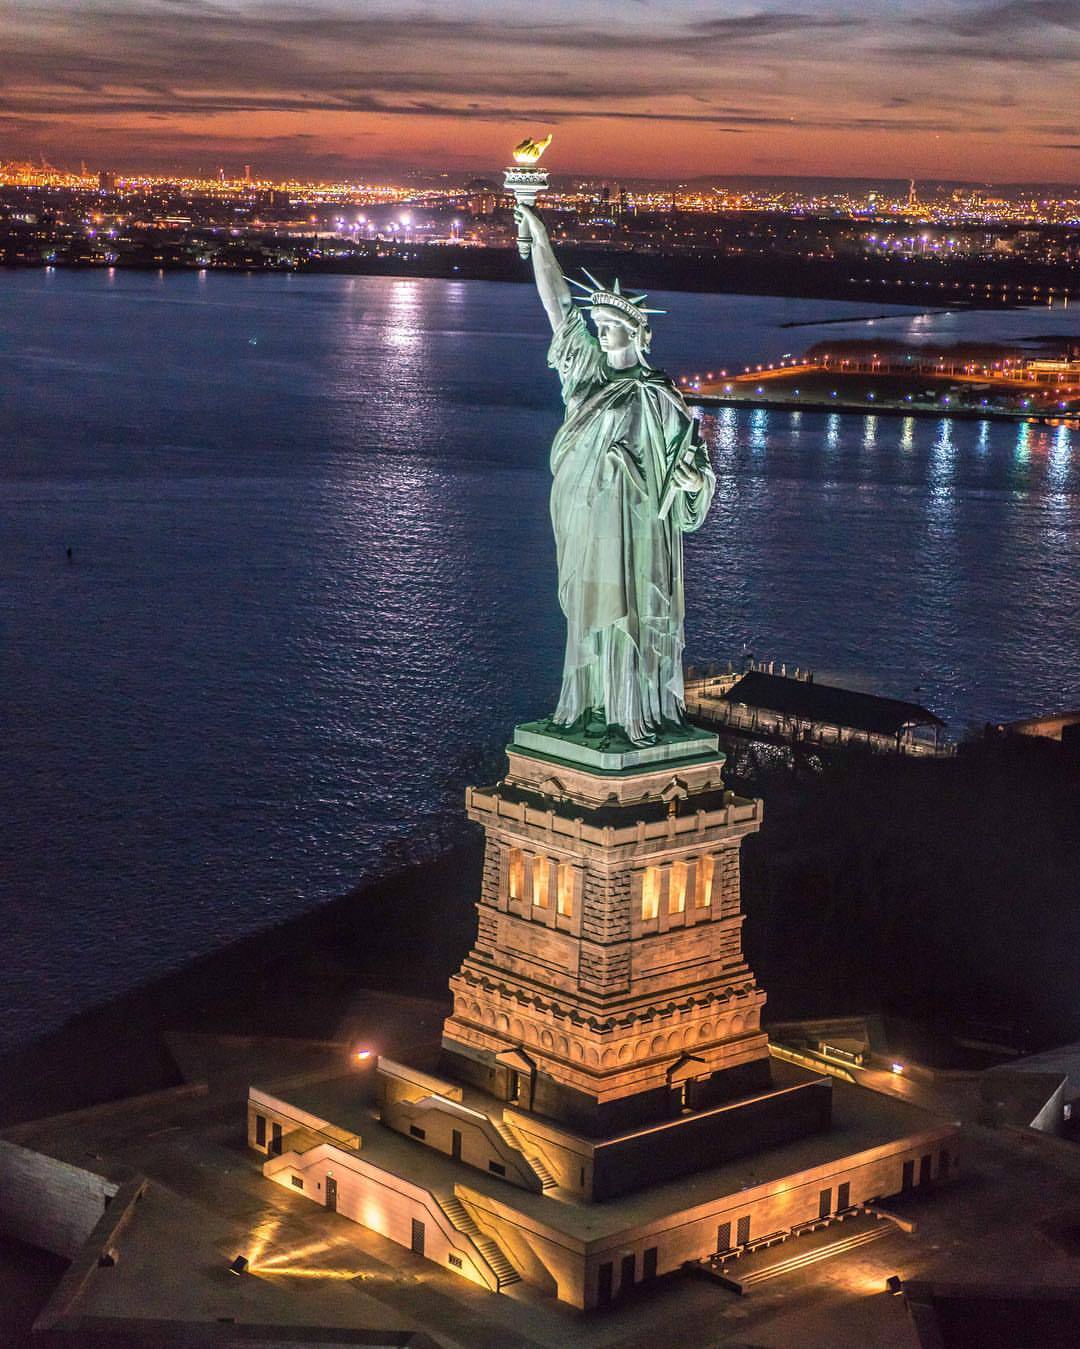 The Statue of Liberty by @davidlacombenyc